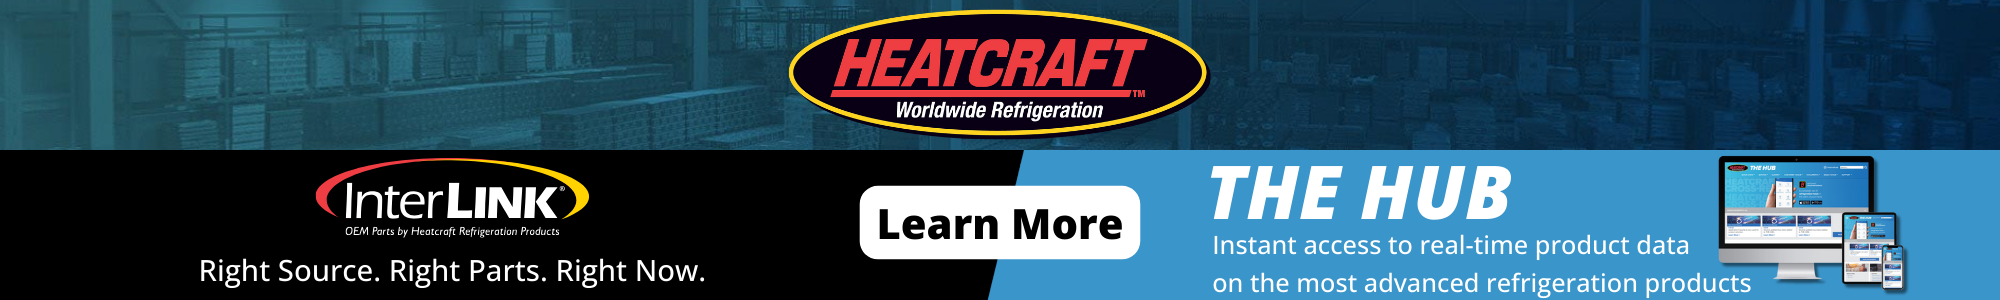 Heatcraft logo with a dual message below. Interlink parts and components. THE HUB online portal for real time product data on the most advanced refrigeration products